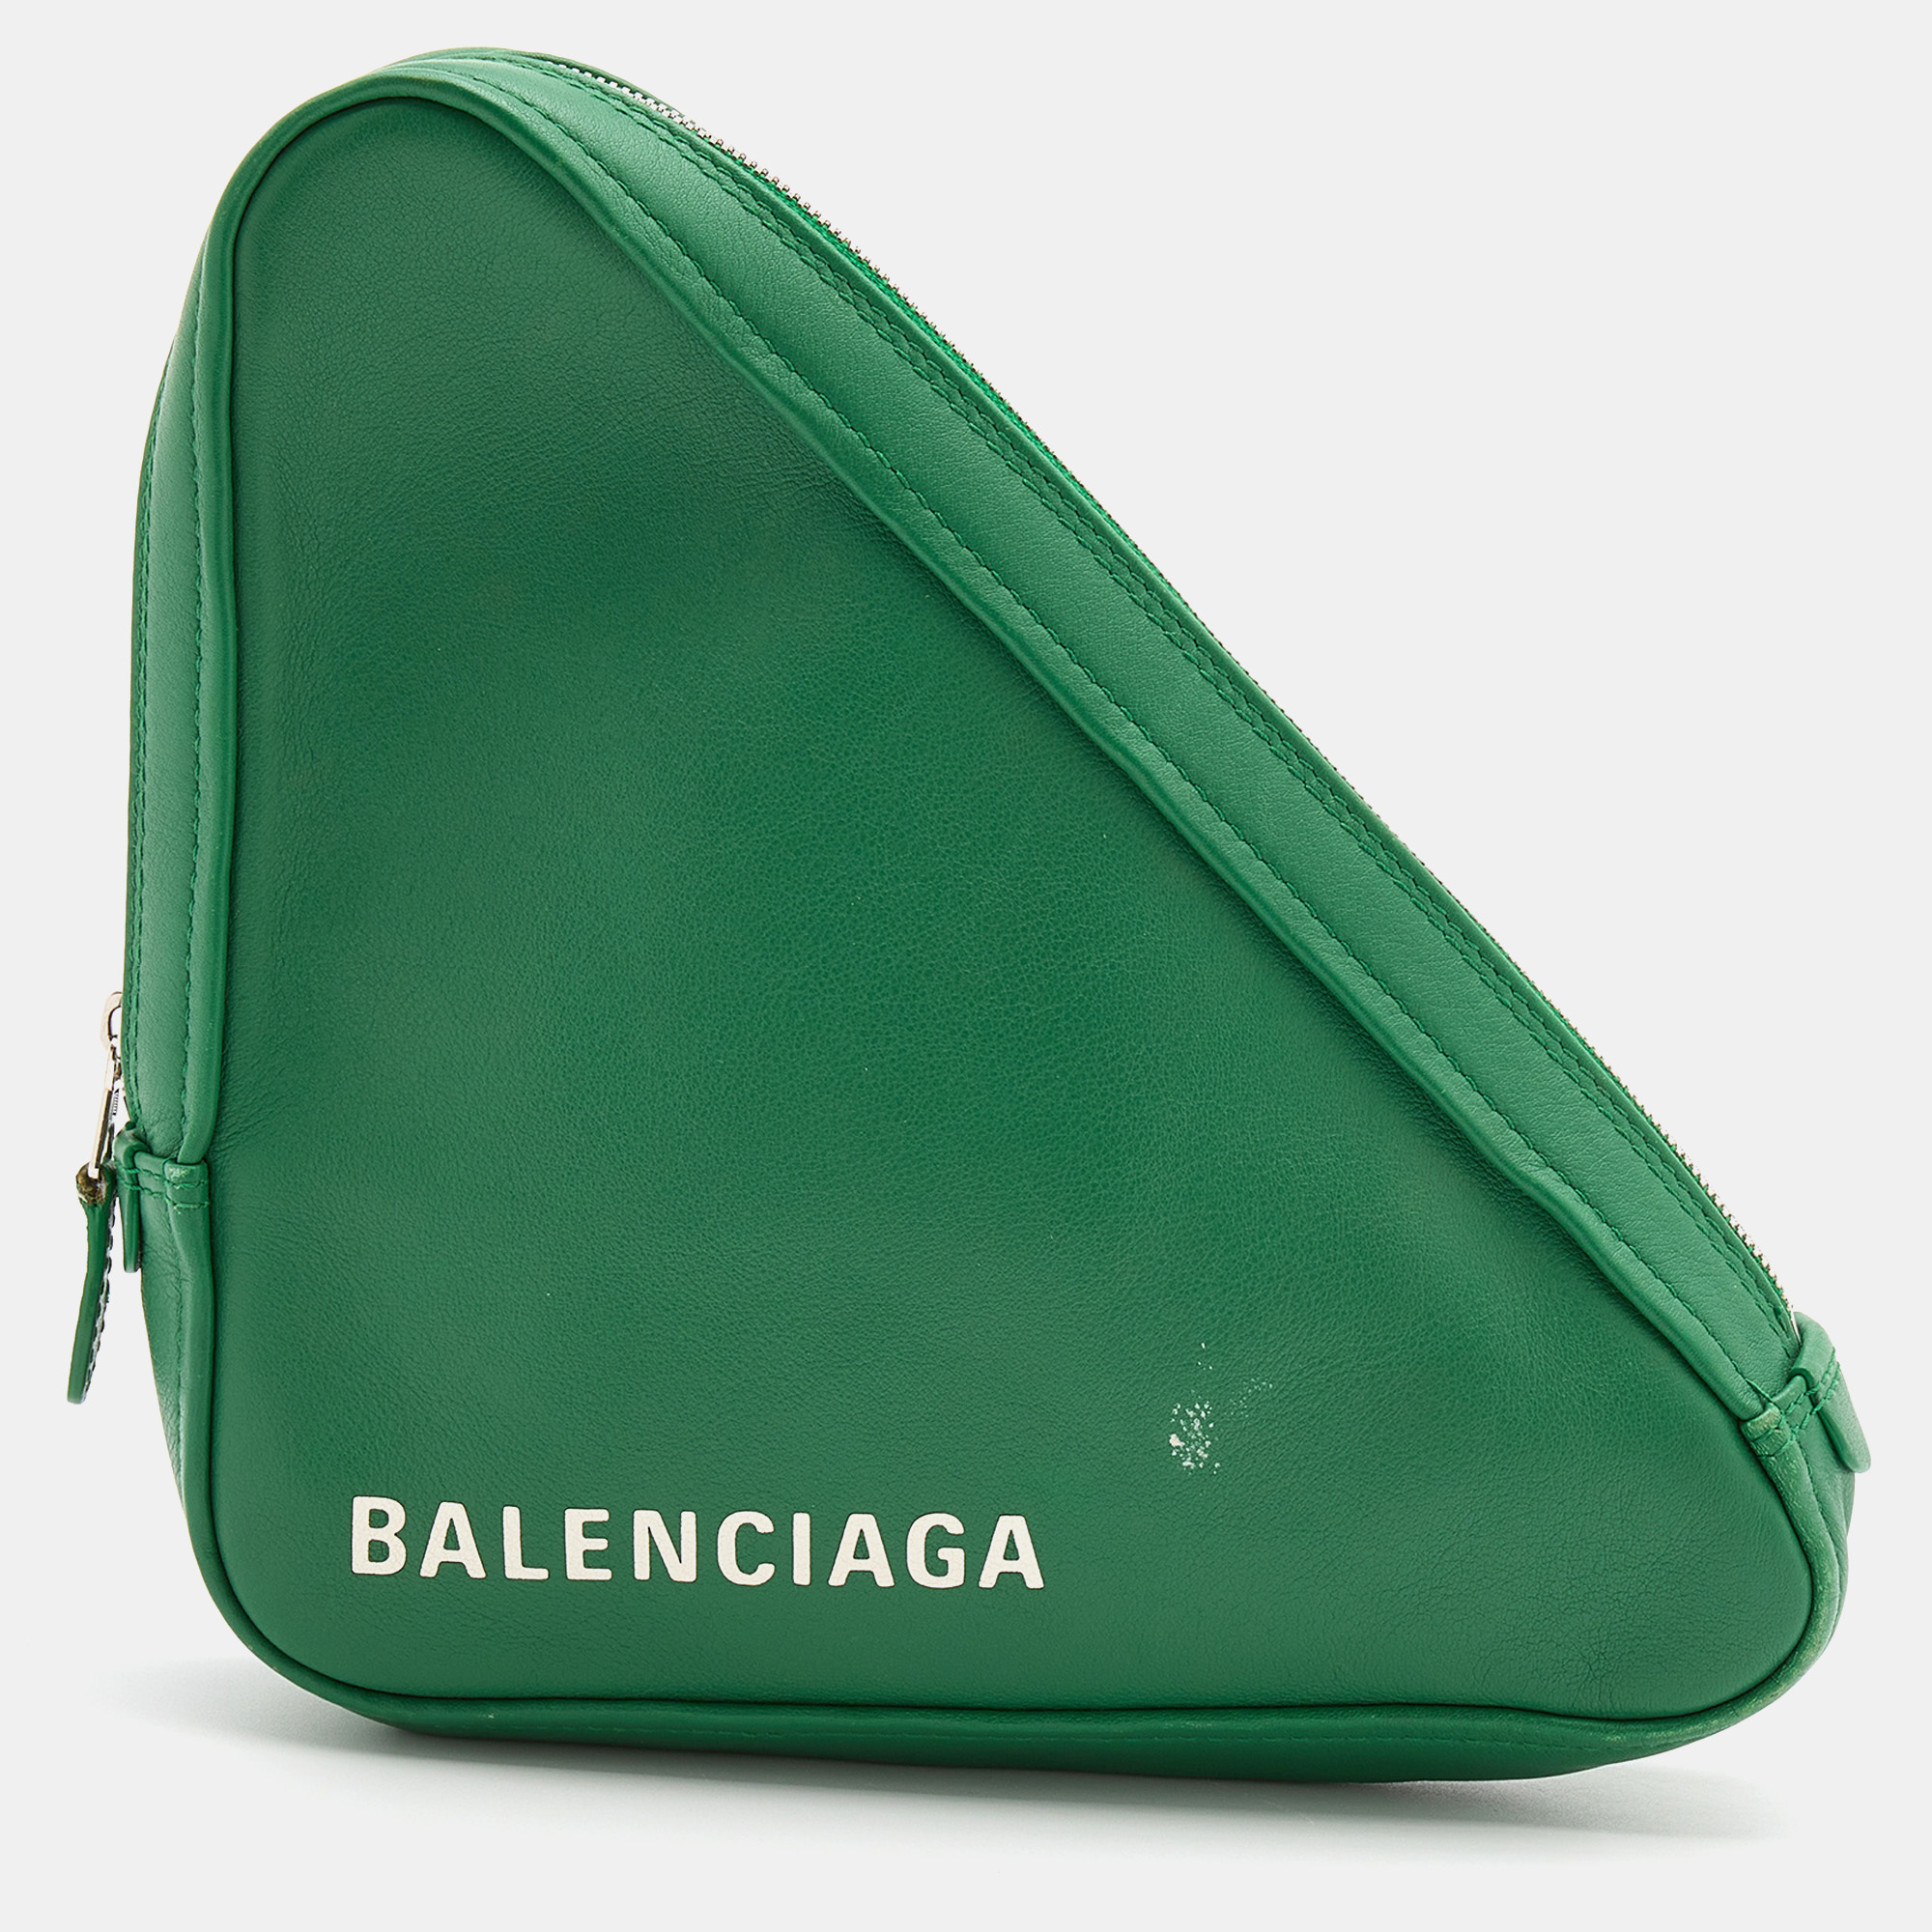 Pre-owned Balenciaga Green Leather Triangle Zip Clutch